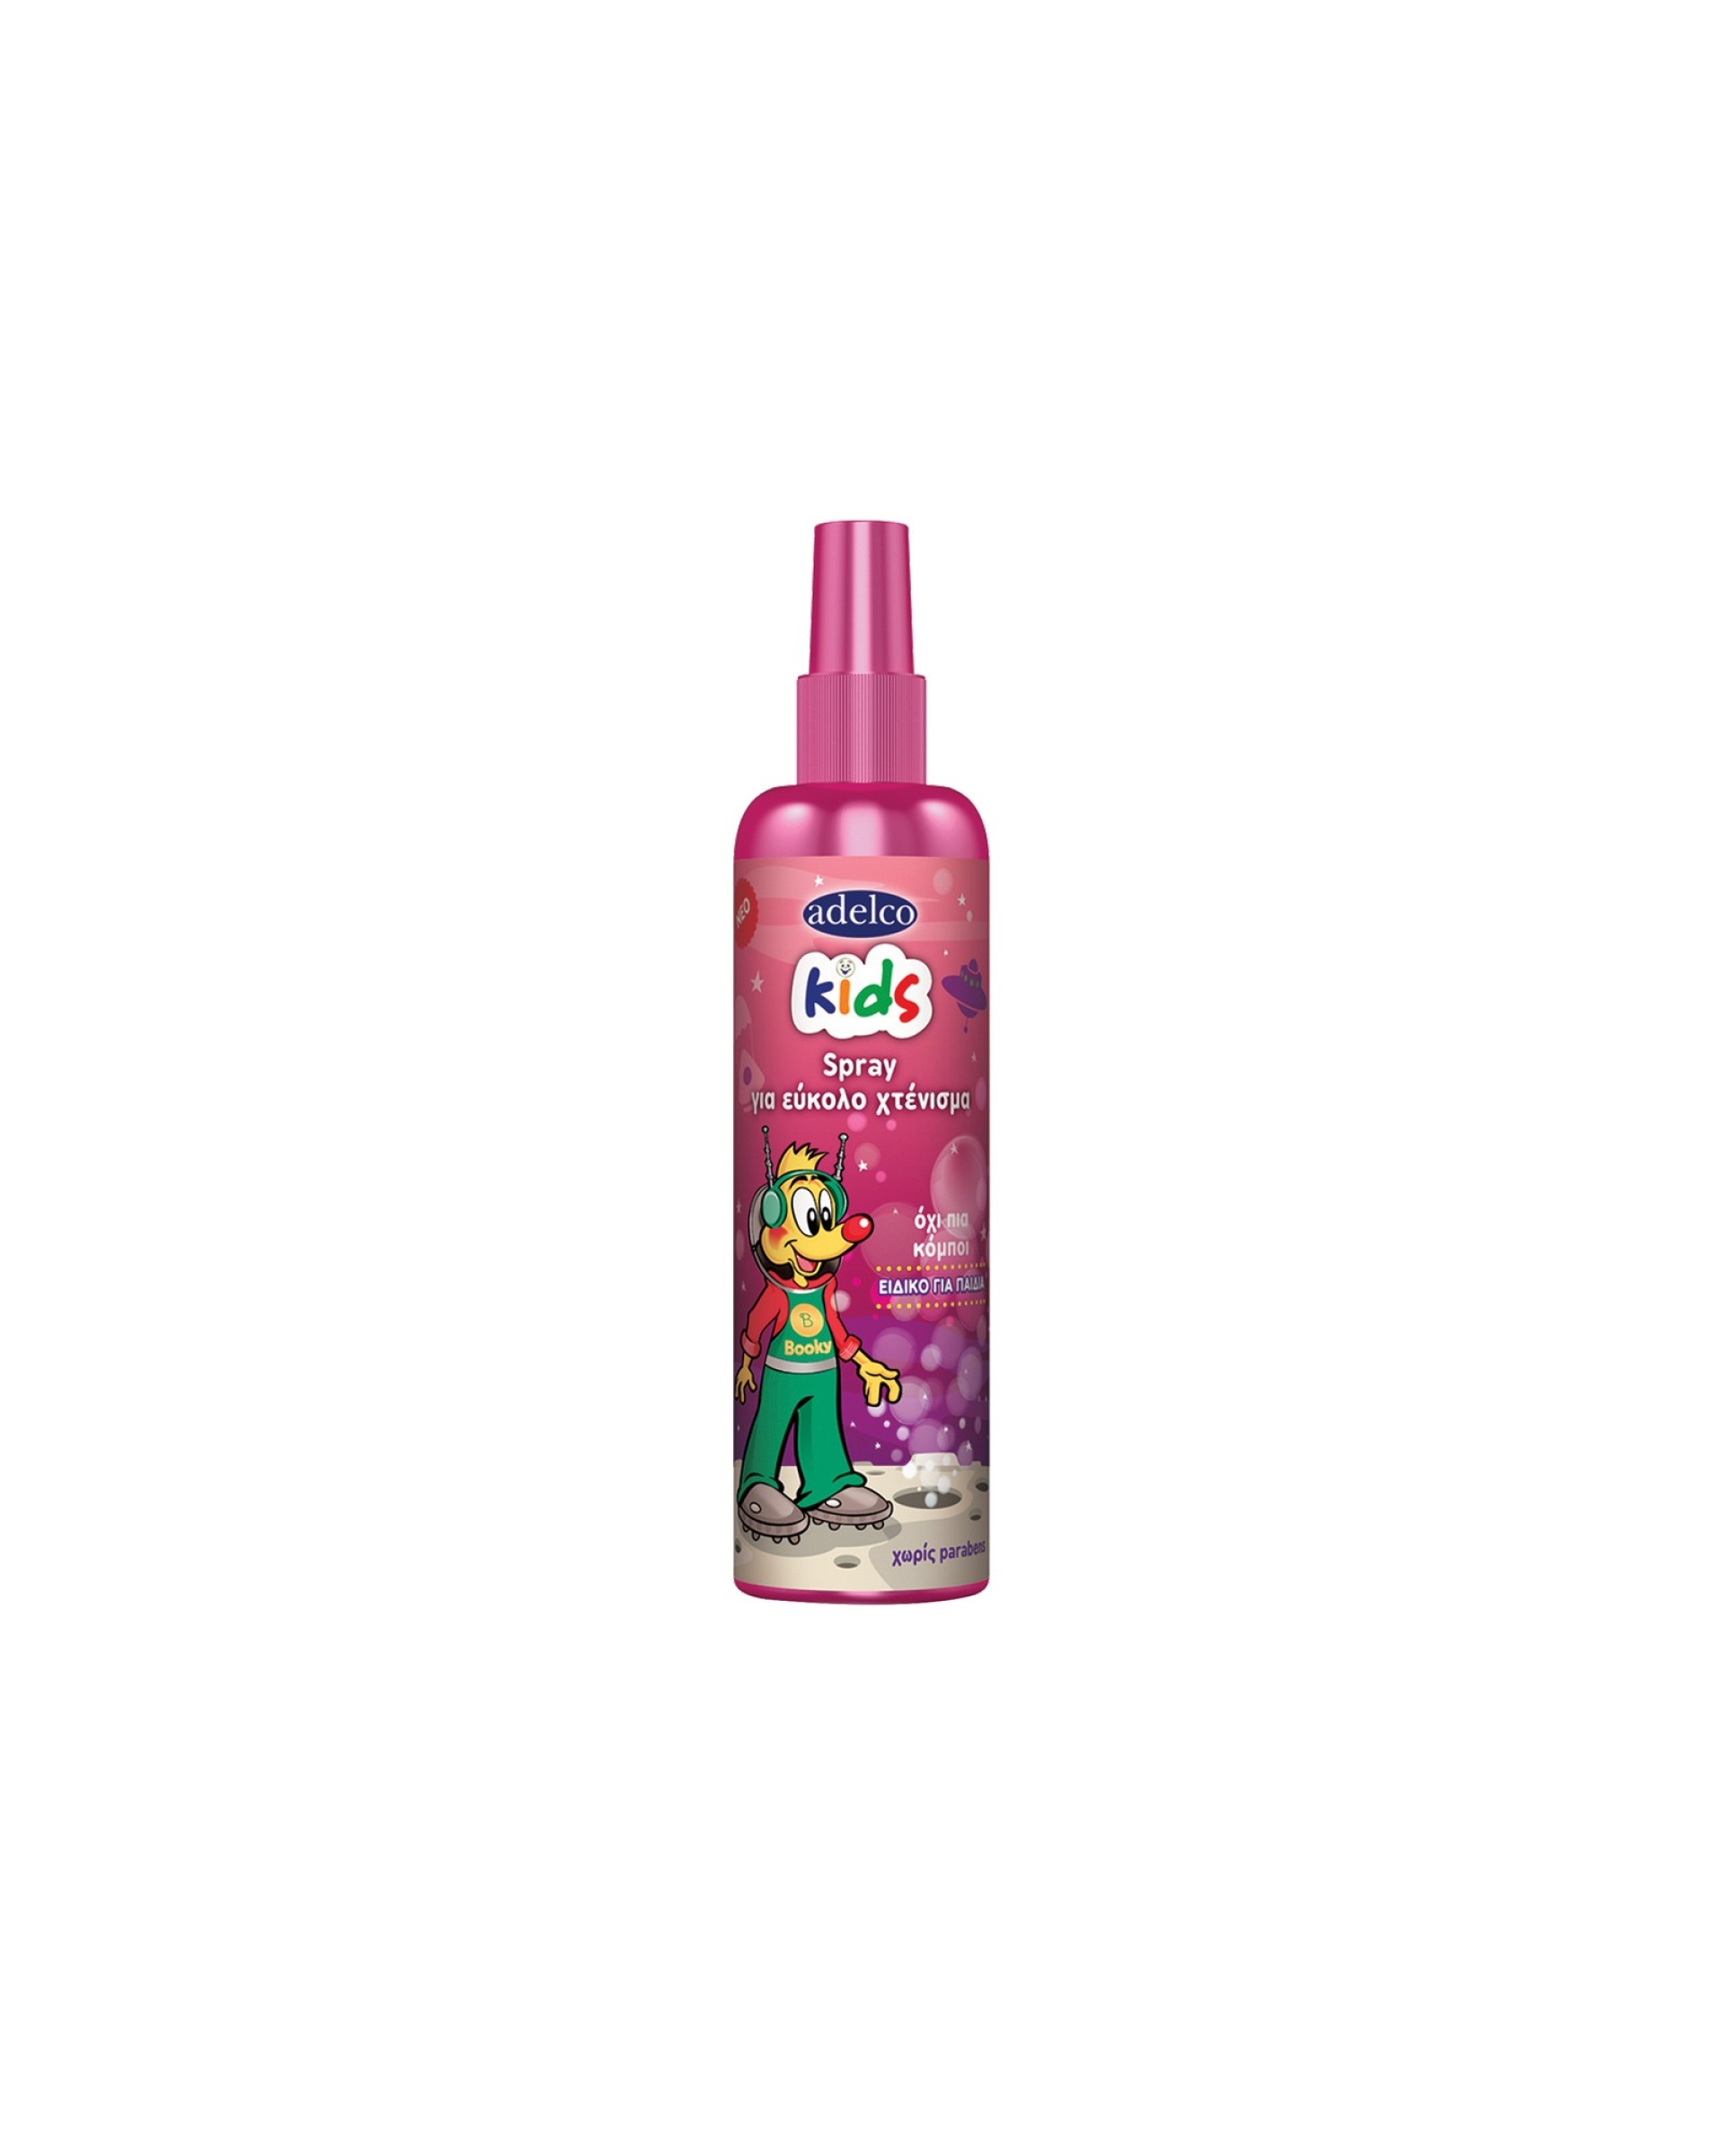 Adelco Kids Spray for easy combing